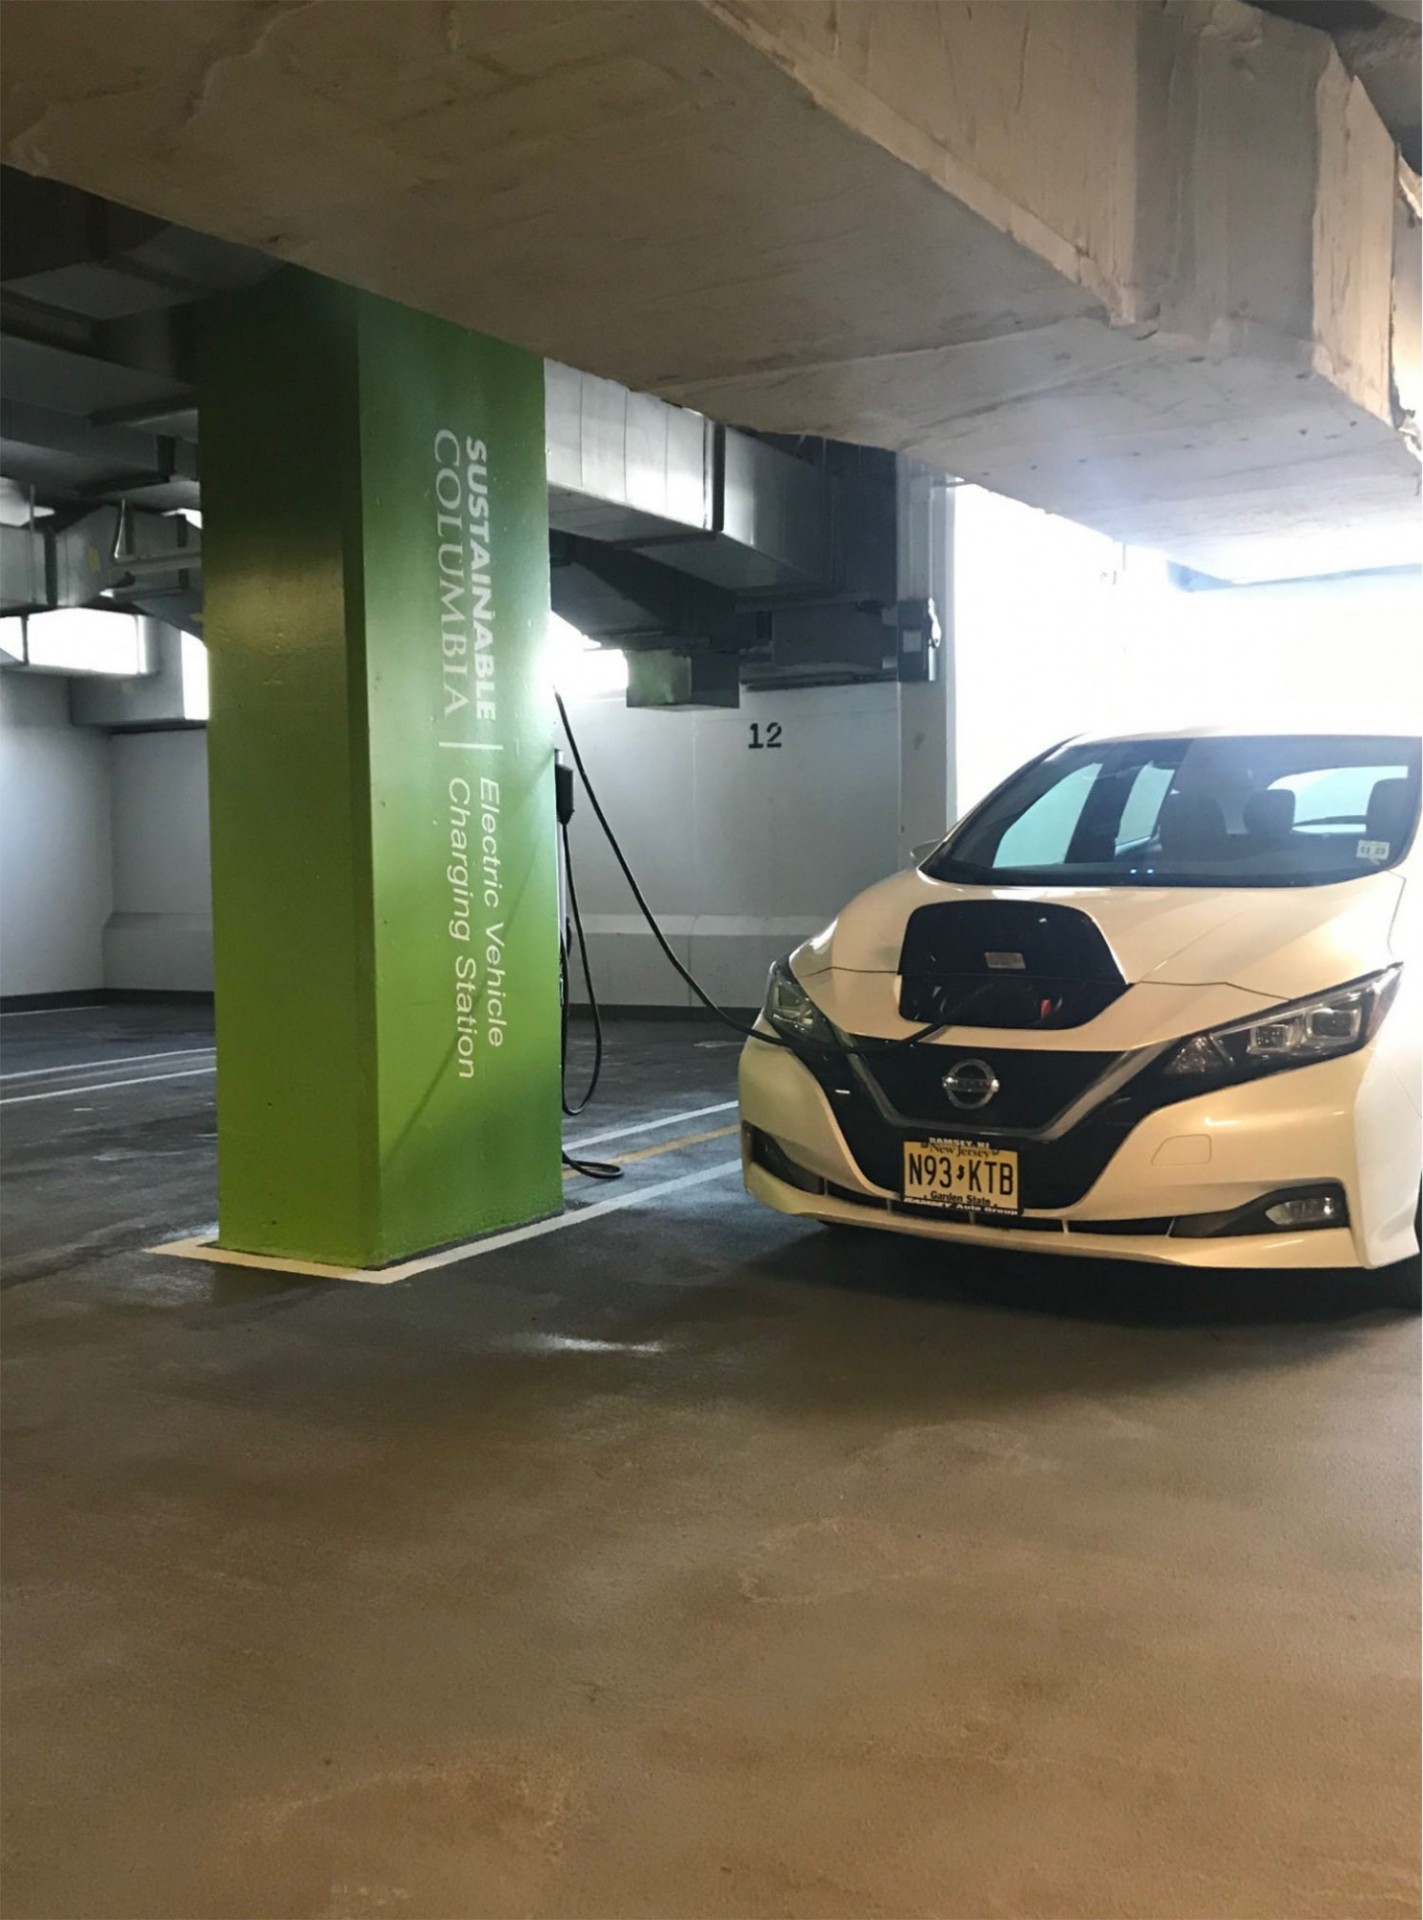 An electric car charging in the Columbia garage with the Sustainable Columbia green and logo on a pillar in the background.